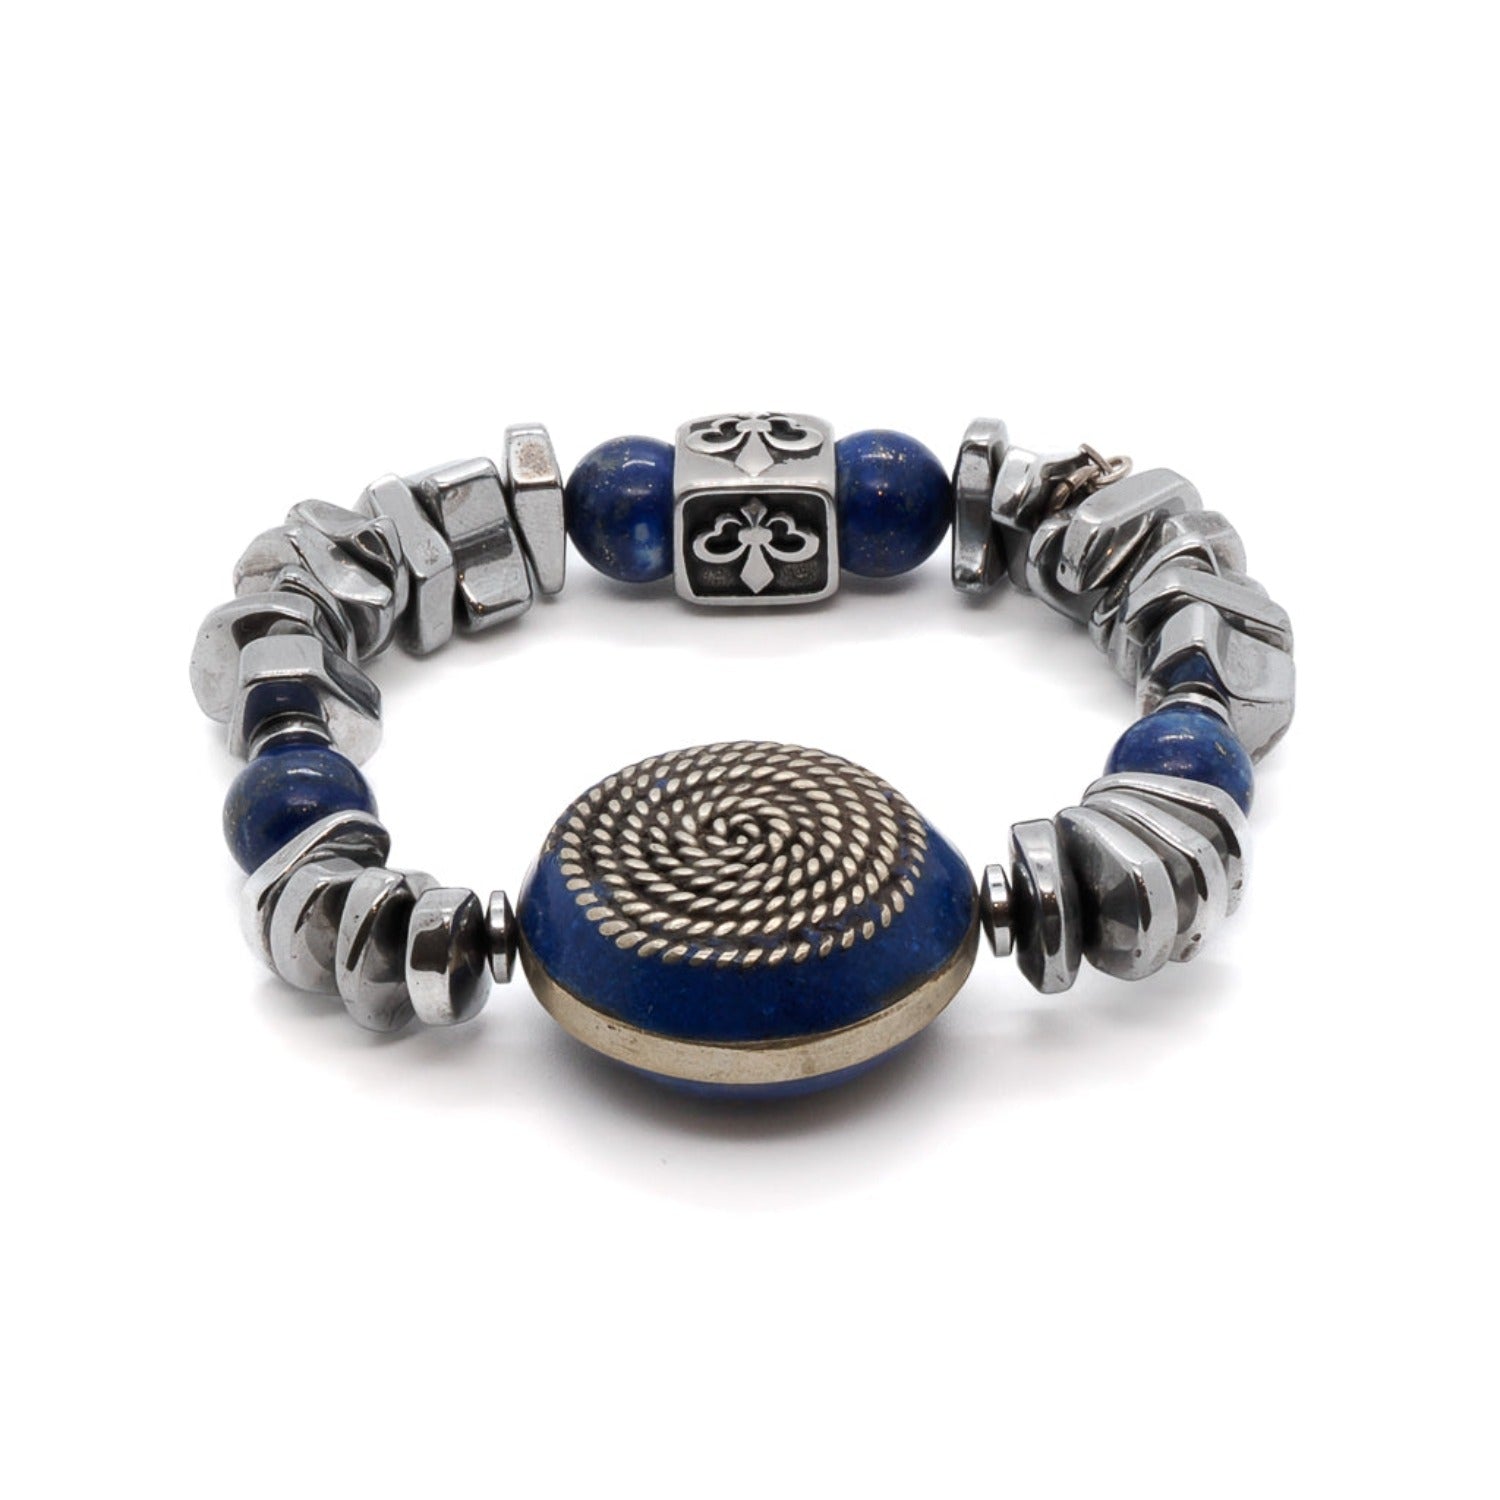 Embrace the strength and beauty of the Strong Women Bracelet, a handmade accessory adorned with silver hematite and lapis lazuli stone beads.